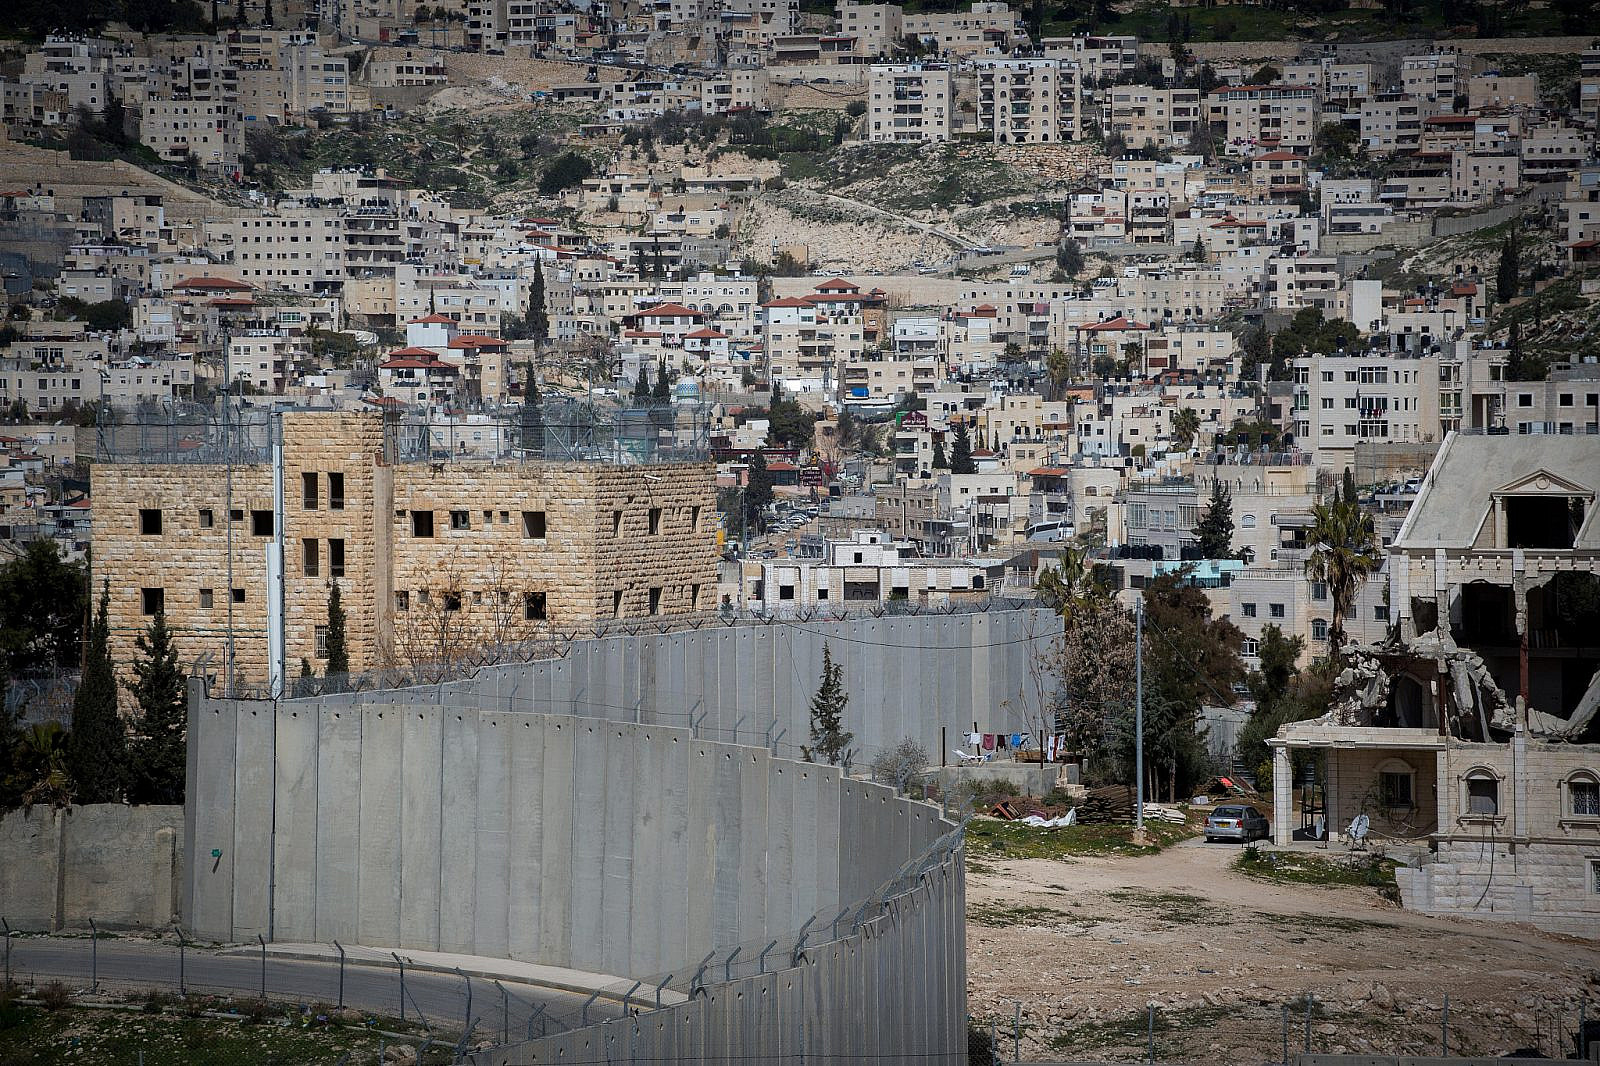 View of the separation wall as seen from the Palestinian town of Abu Dis. February 26, 2017. (Miriam Alster/FLASH90)